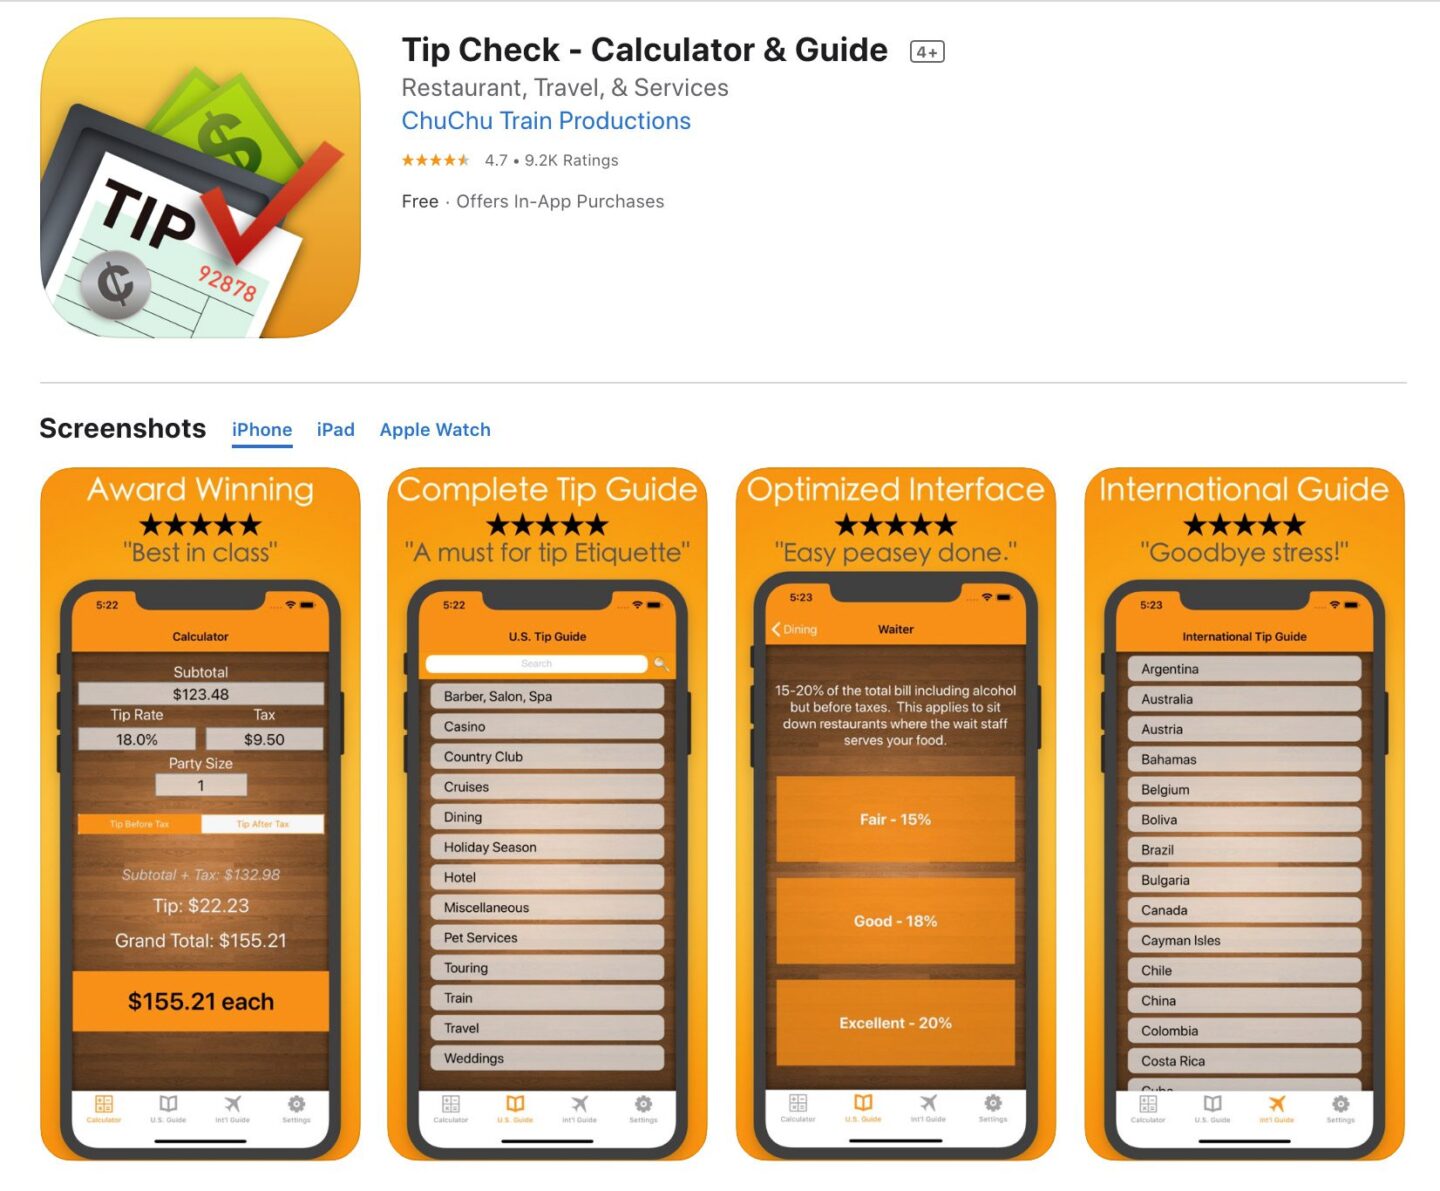 Screenshot of the Tips Check app from the iOS app store.